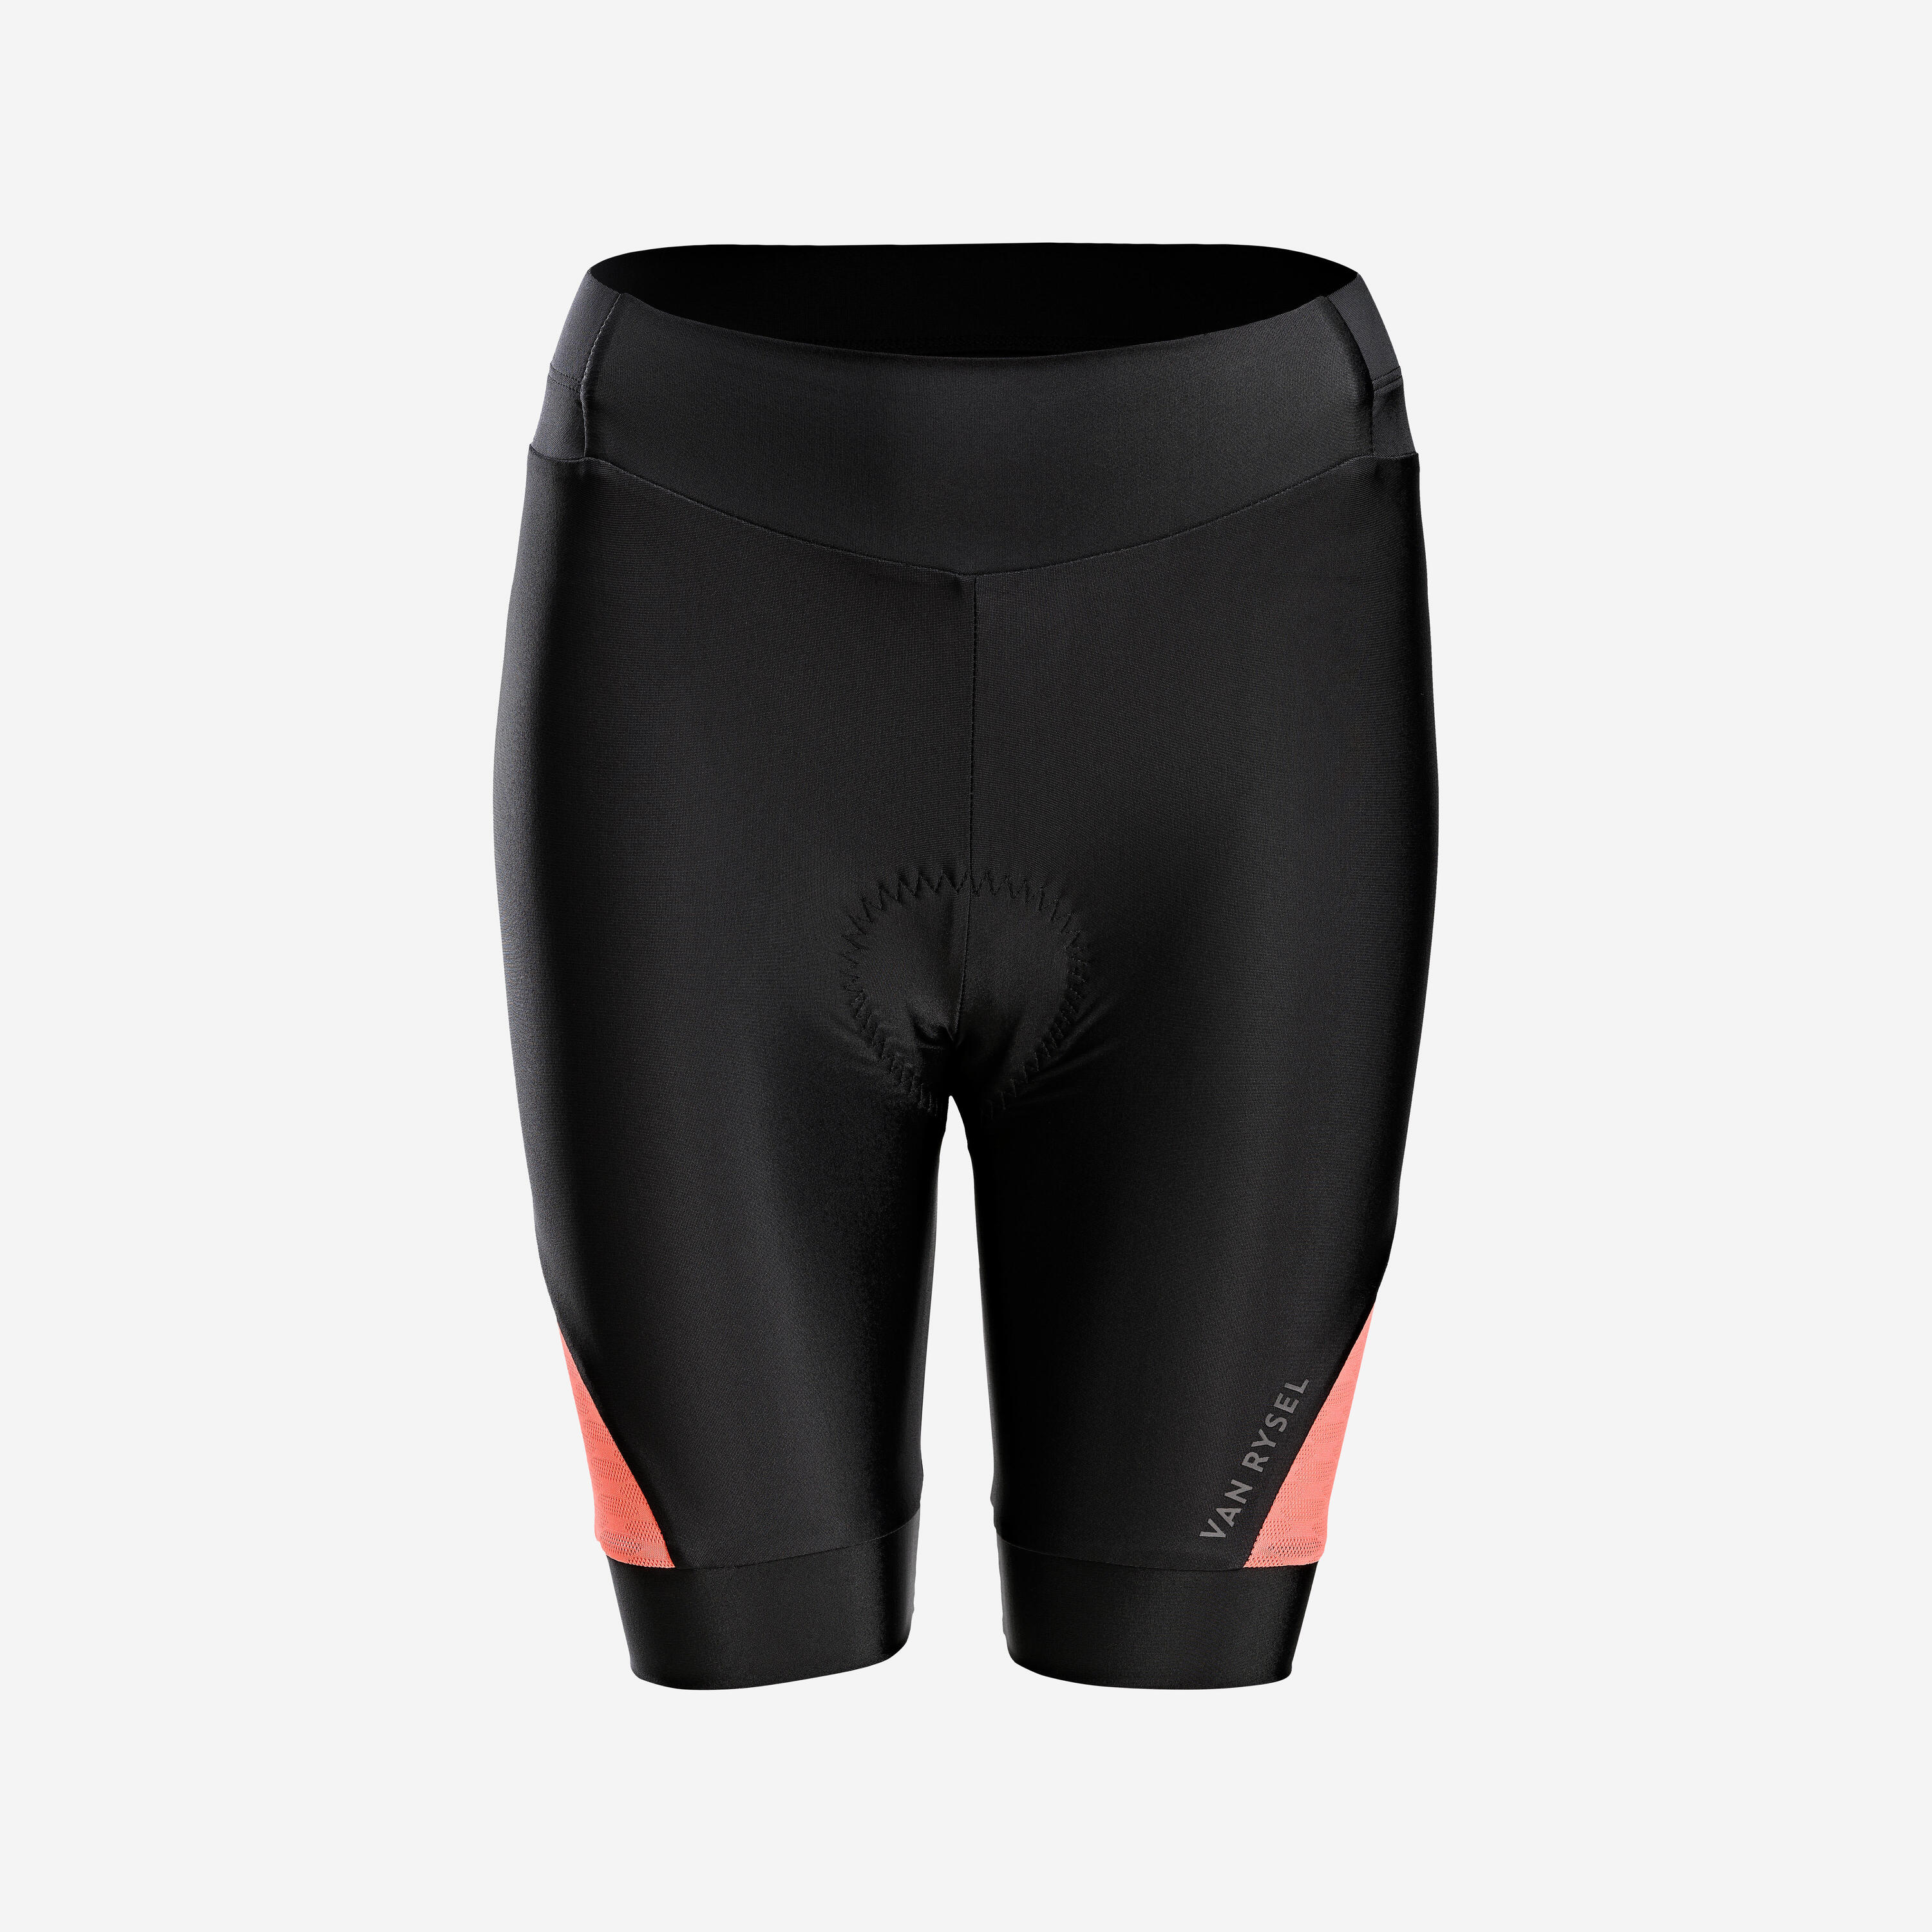 Women's Strapless Summer Road Cycle Shorts Discover - Black/Coral 1/7